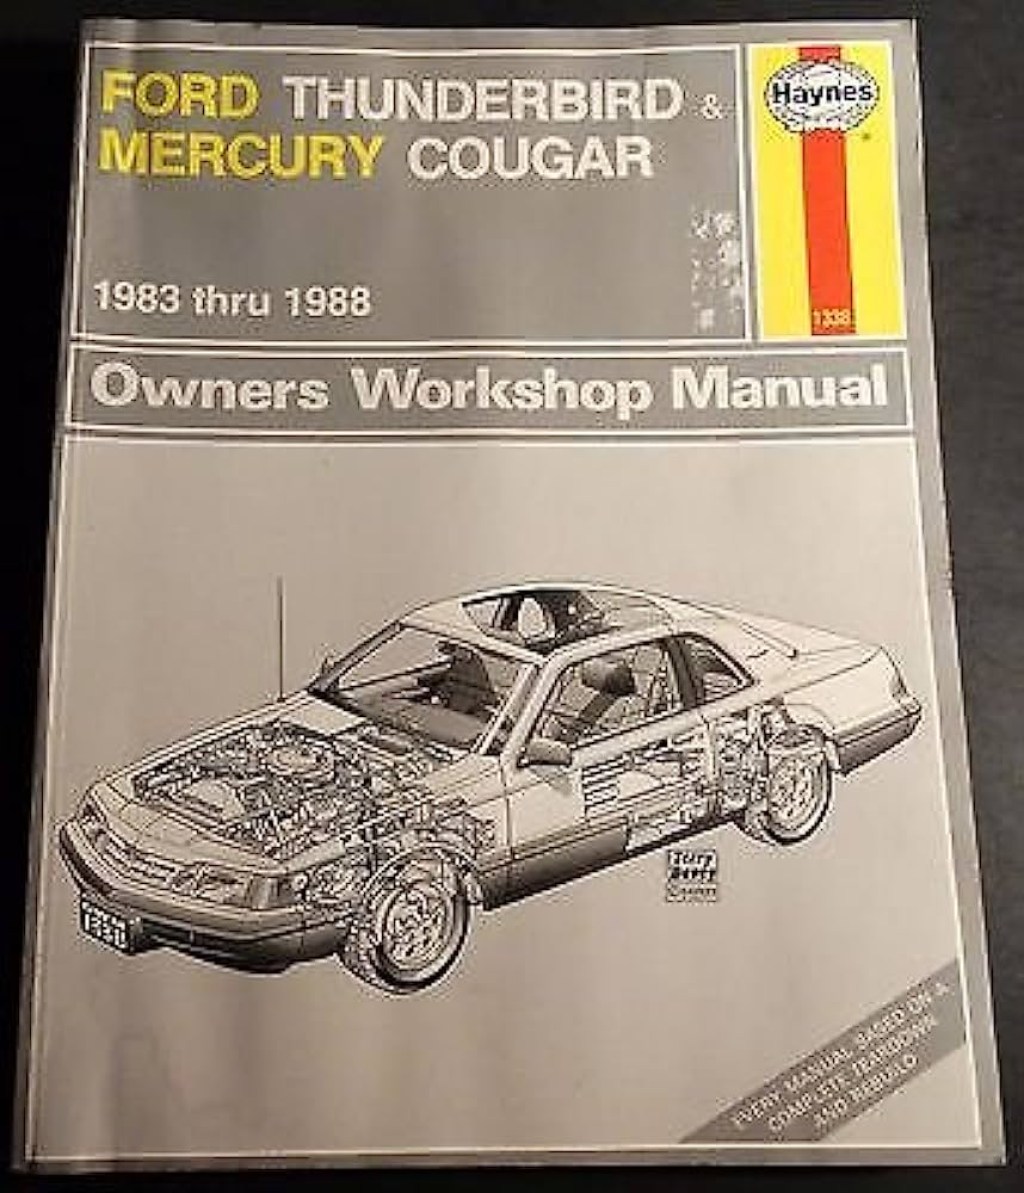 Picture of: – HAYNES FORD THUNDERBIRD MERCURY COUGAR SERVICE MANUAL () ()